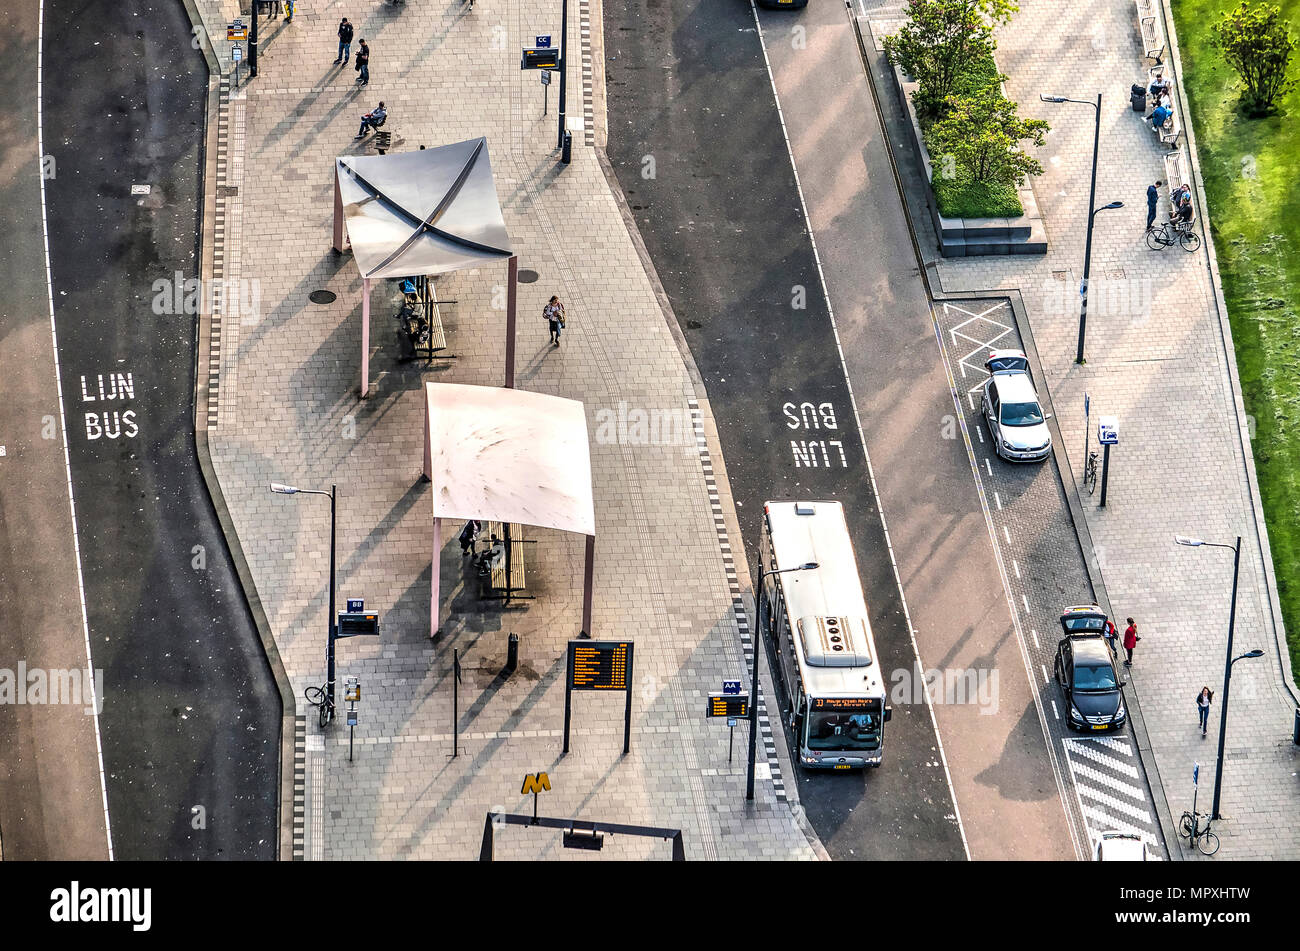 Rotterdam, The Netherlands, May 11, 2018: Close-up of the central busstation seen from above, with a city bus, shelters and a kiss and ride zone Stock Photo